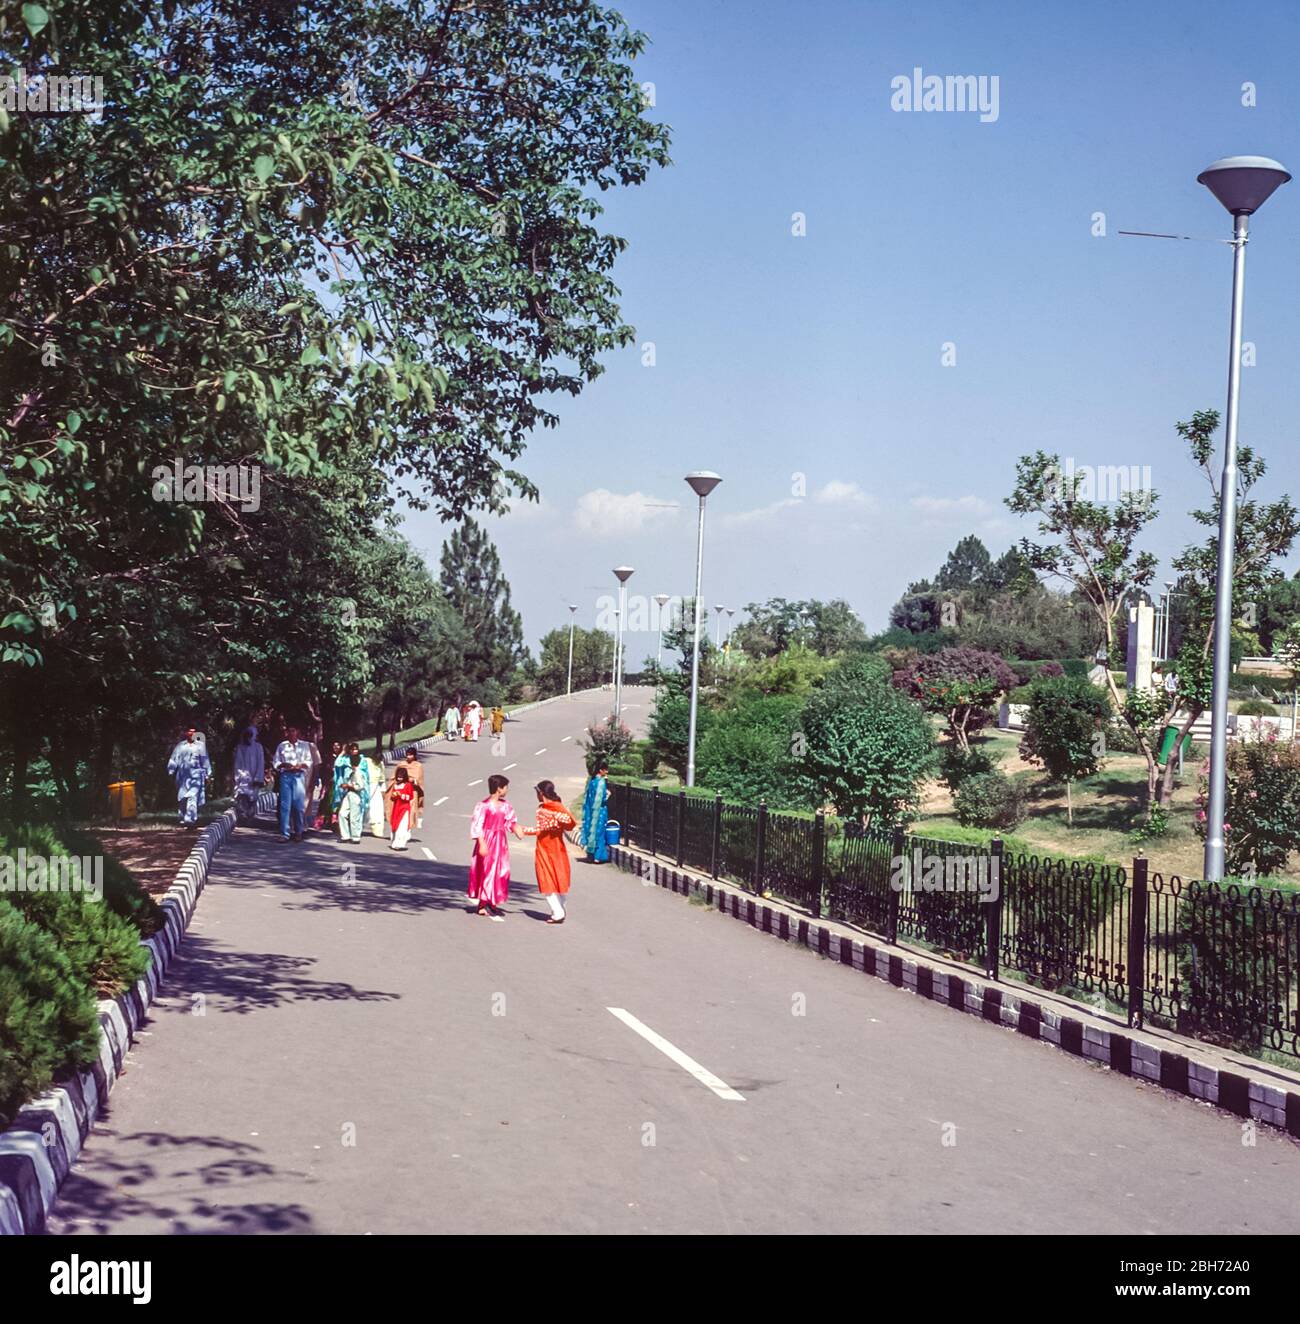 Pakistan, Islamabad street scene with young girls dressed in brightly coloured dresses making their way to the Shakaparian Park and gardens Stock Photo